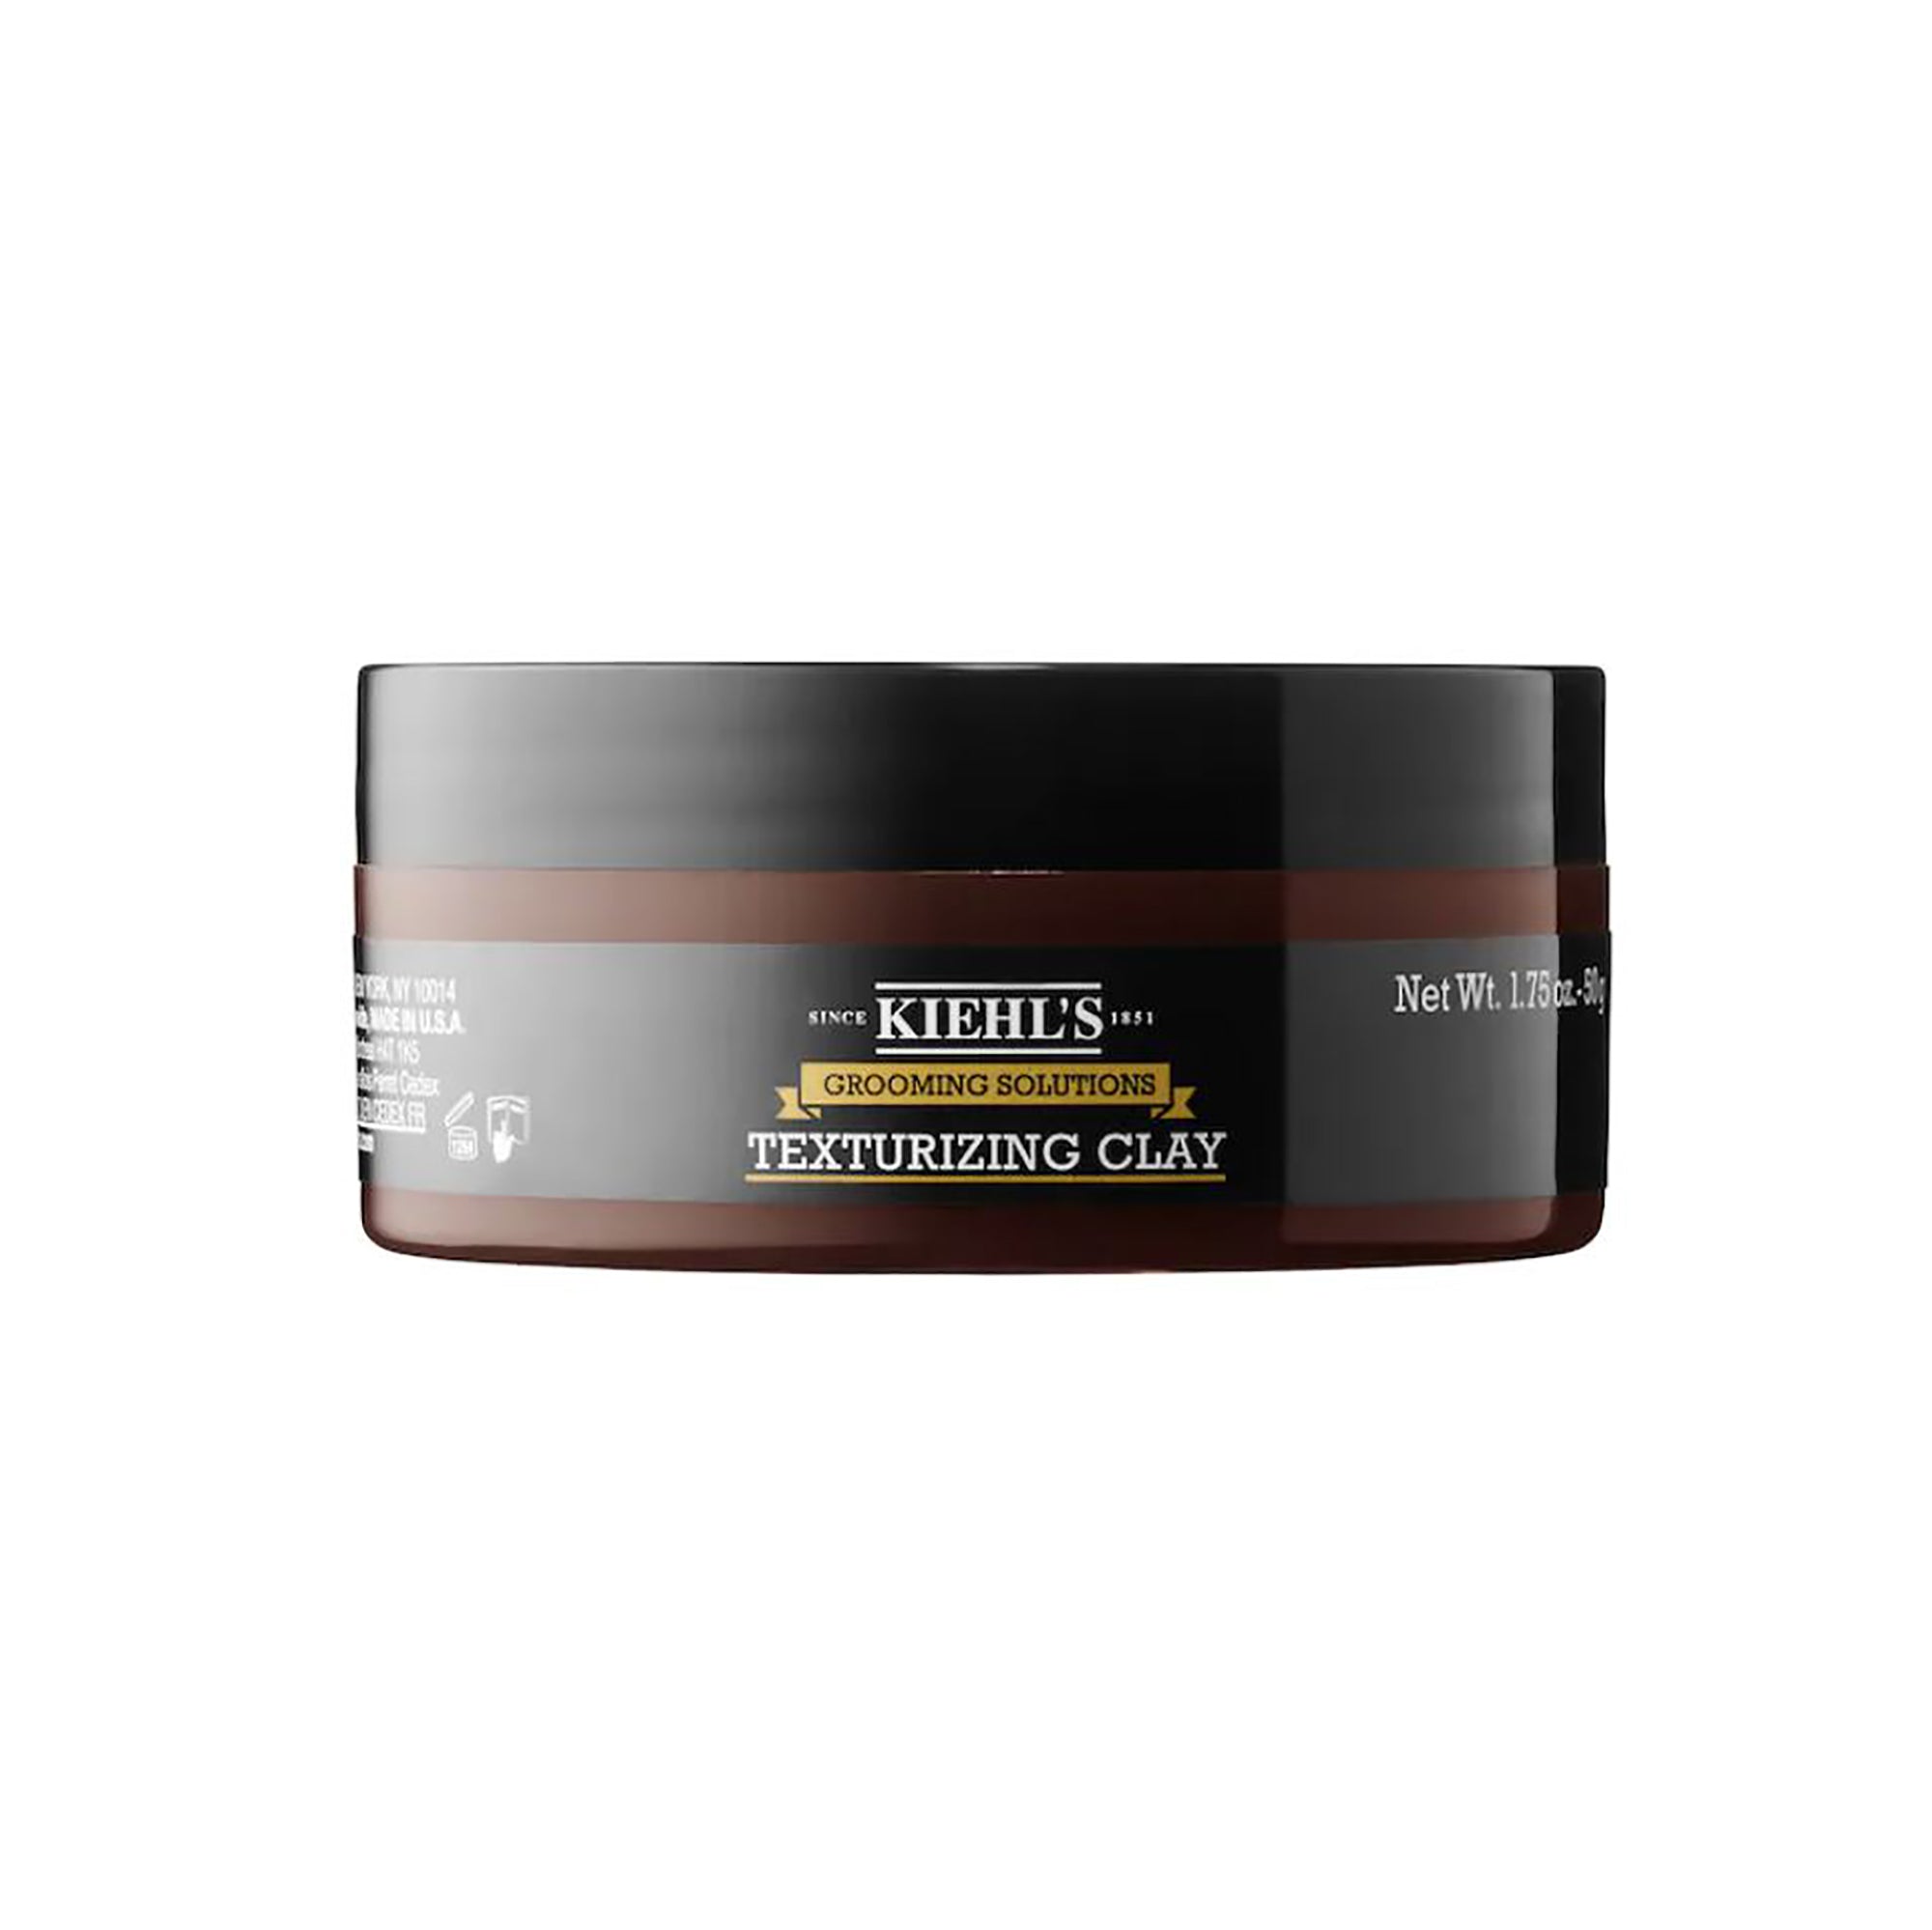 Kiehl's Grooming Solutions Texturizing Clay / 1.75